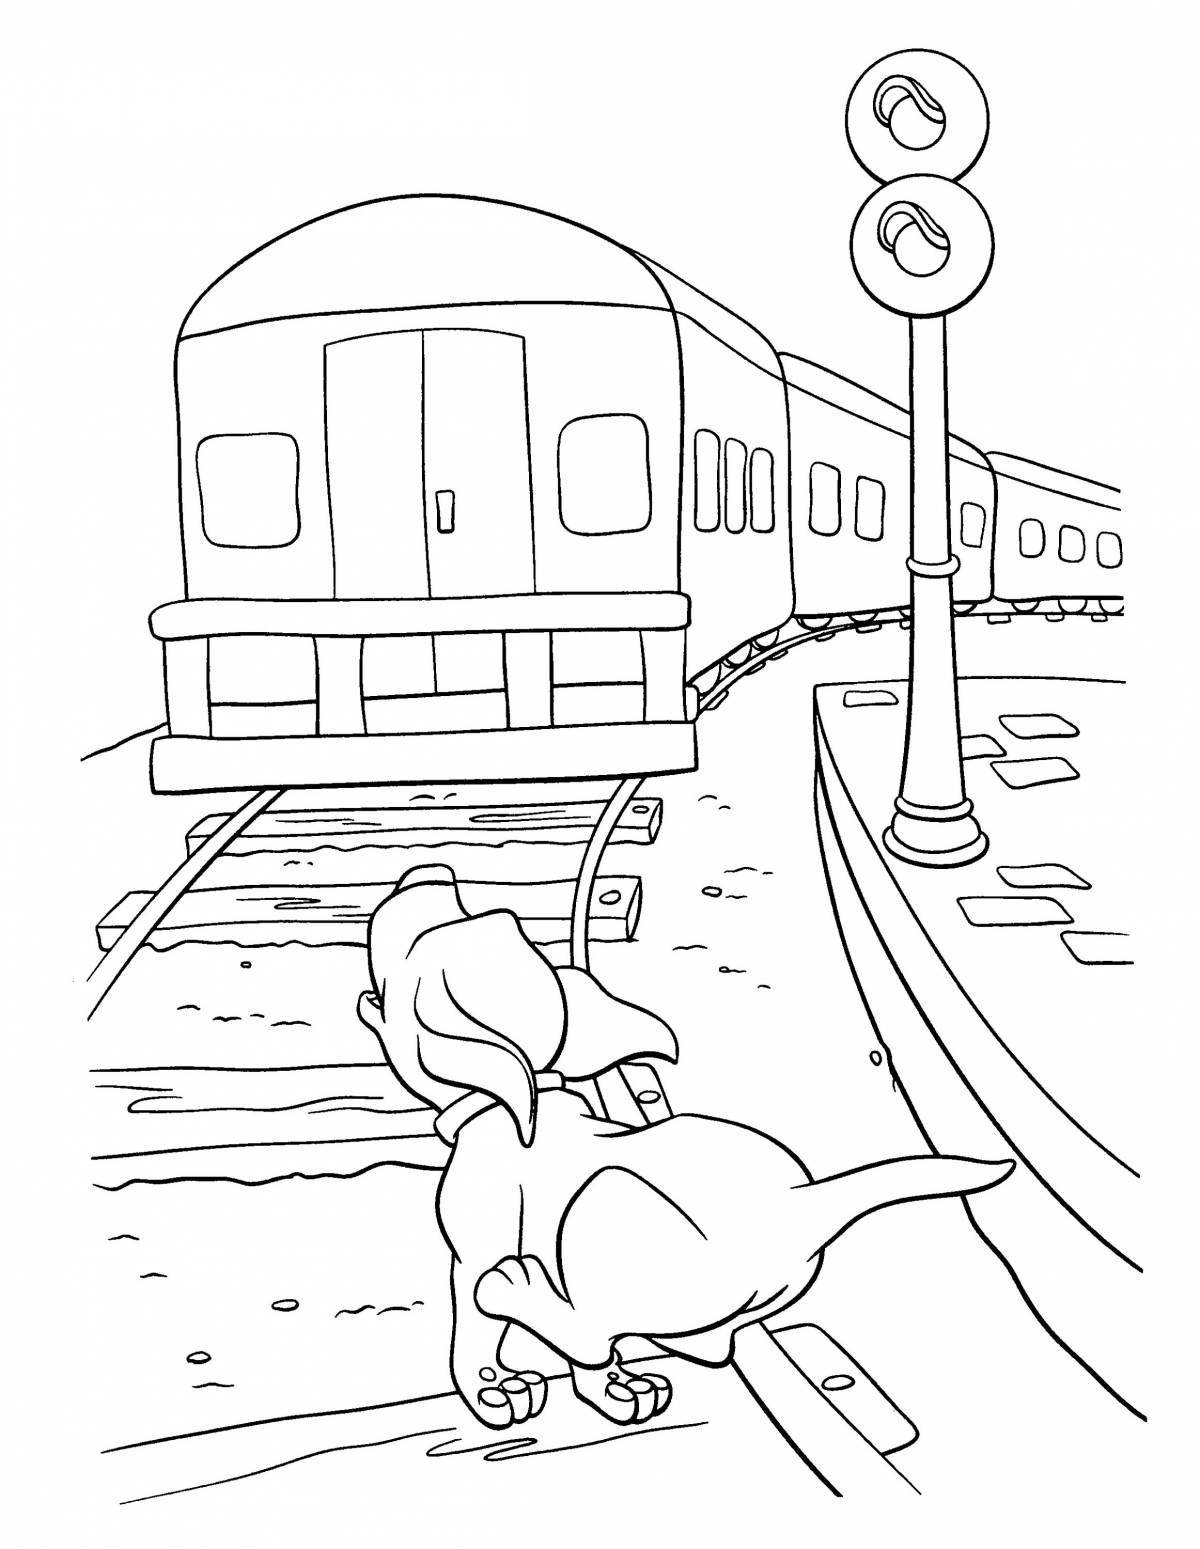 Coloring book funny railroad safety signs